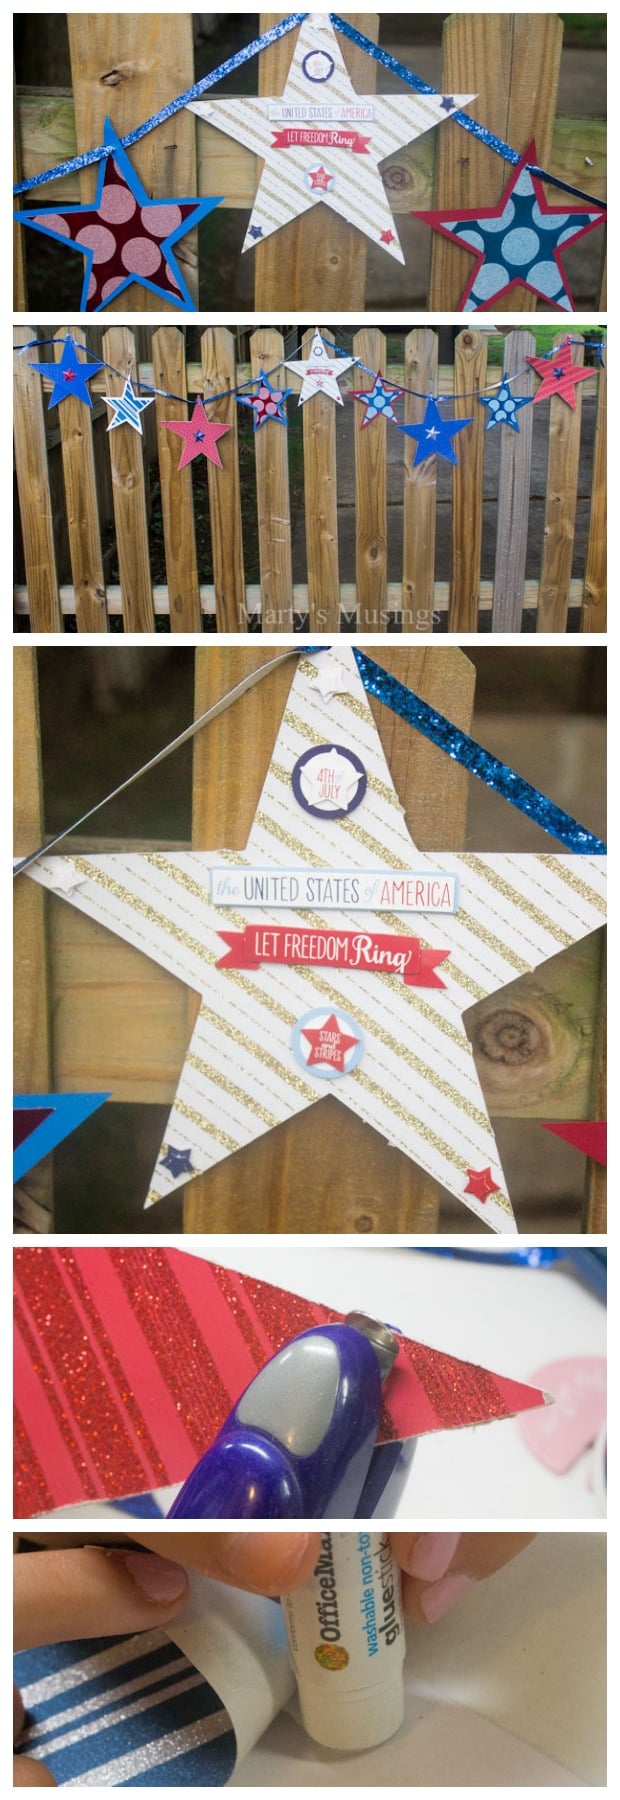 Easy Fourth of July Banner Tutorial - Marty's Musings